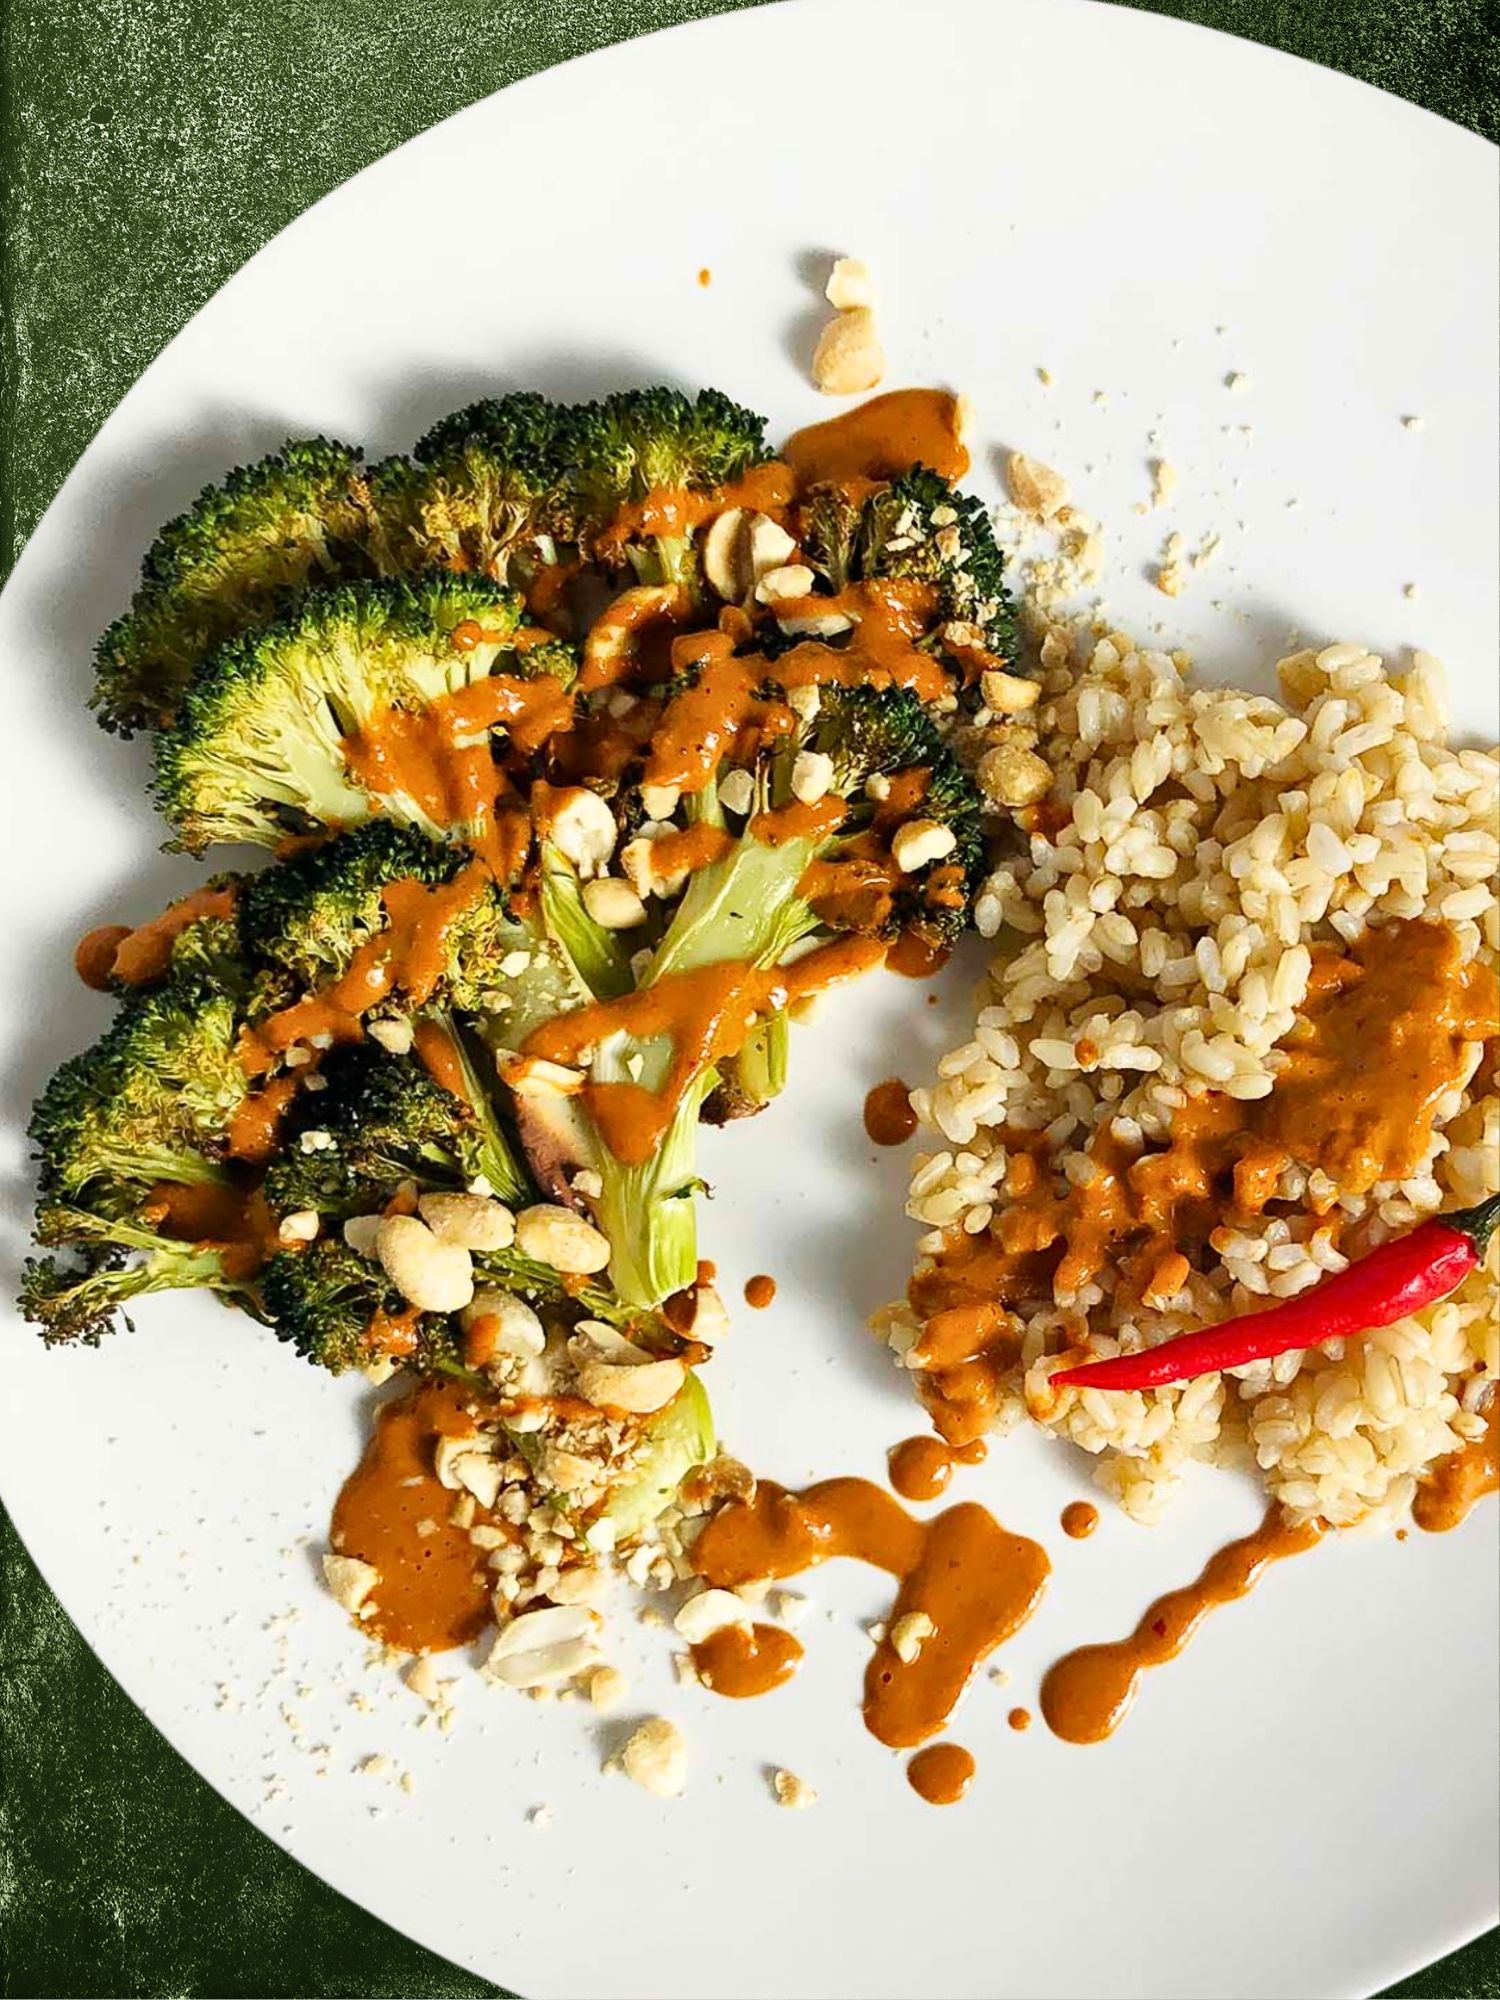 Top-down view of Spicy Thai-inspired Peanut Sauce over roasted broccoli and brown rice. Serving suggestion for the peanut sauce. 